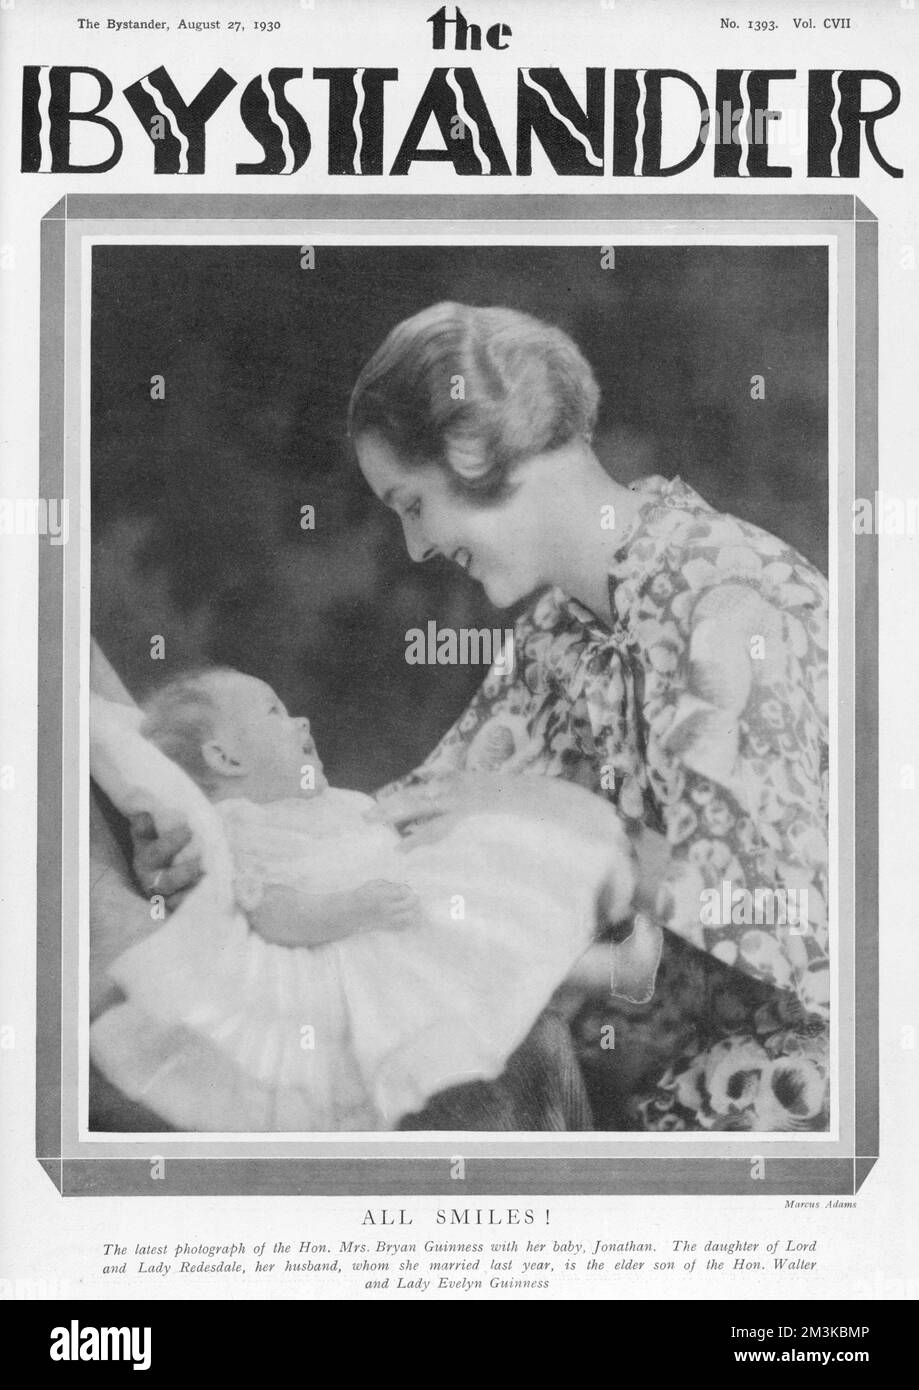 Mrs Bryan Guinness, aka Diana Freeman Mitford, later Mosley (1910 - 2003), pictured with her eldest son, Jonathan on the front cover of The Bystander magazine.  Diana Mitford was one of the six infamous sisters, daughters of Lord and Lady Redesdale. She married into the wealthy Guinness family at the age of 19 in 1929, but began a love affair with Sir Oswald Moseley, leader of the British Union of Fascists ('Blackshirts')in the 1930's. During the Second World War, she and Moseley were imprisoned as Nazi sympathisers.     Date: 1930 Stock Photo